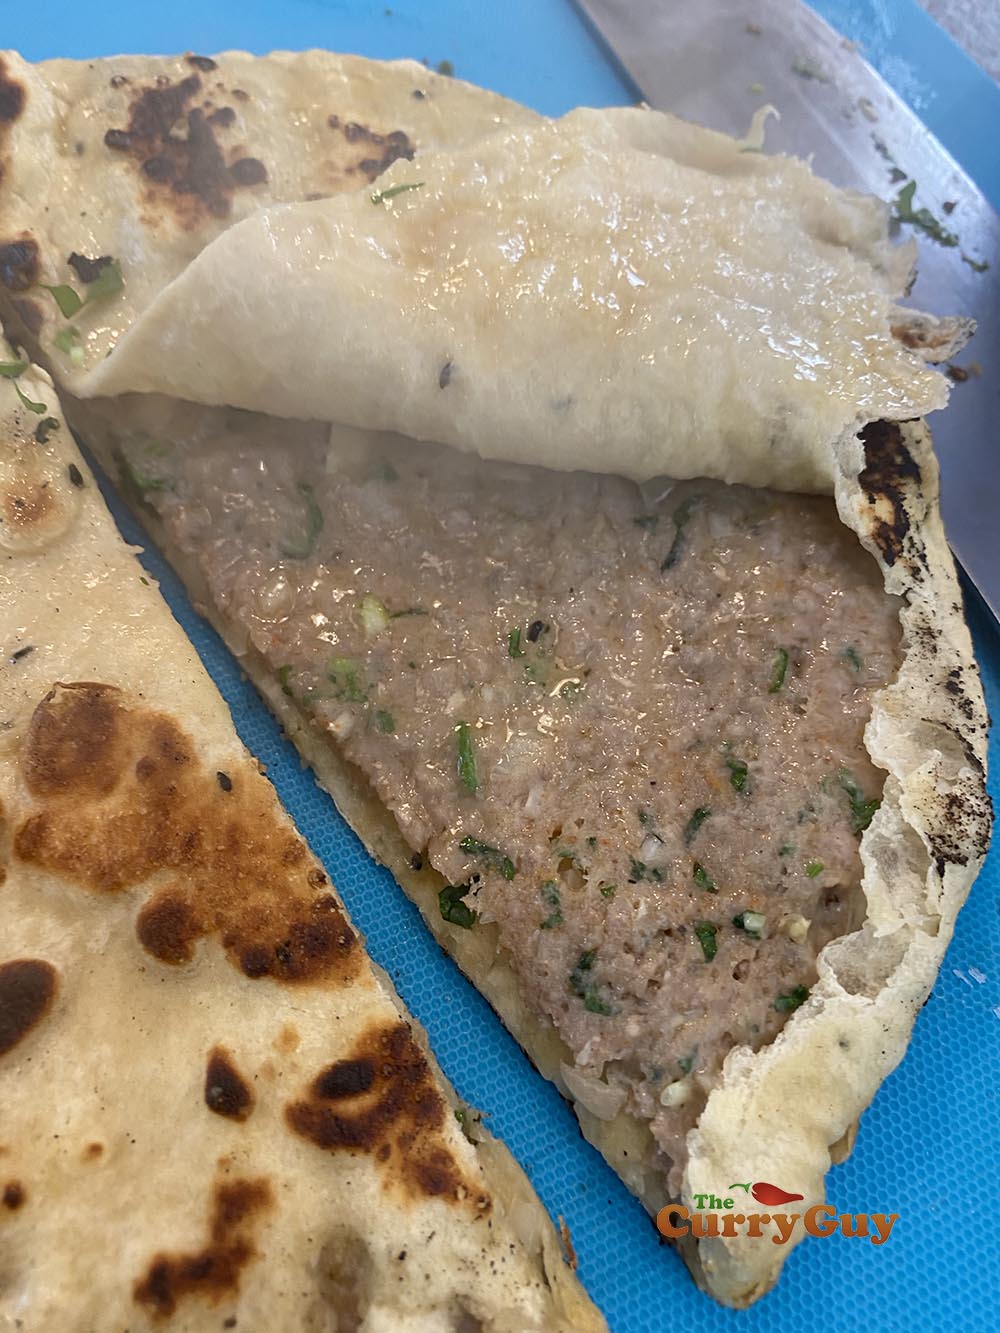 Finished Indian restaurant style keema naan